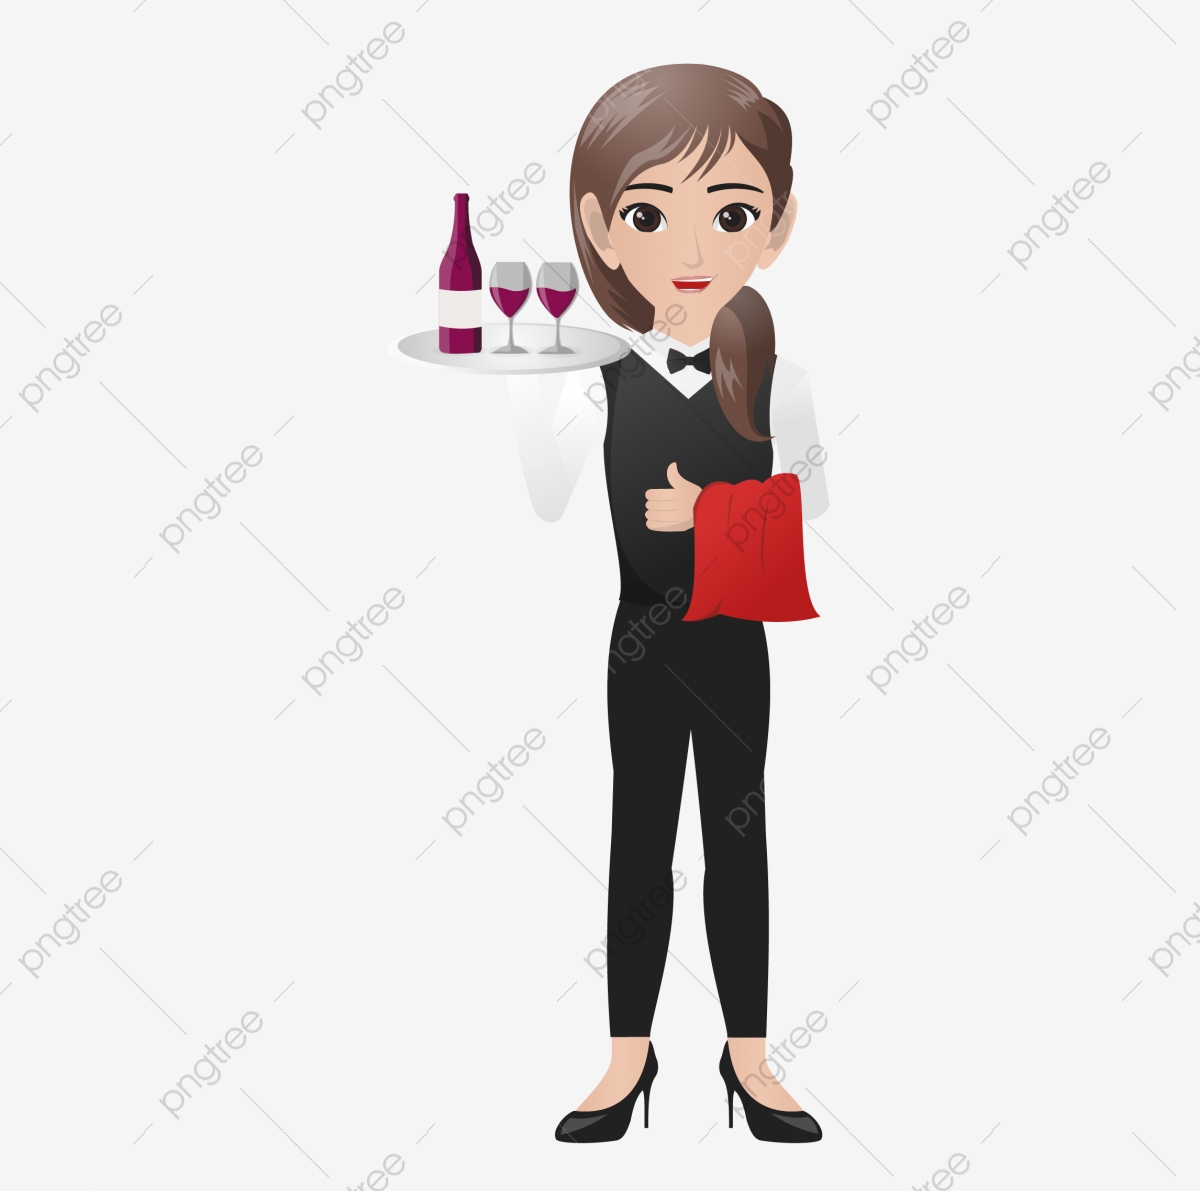 Waiter caterer cartoon dining. Waitress clipart food catering